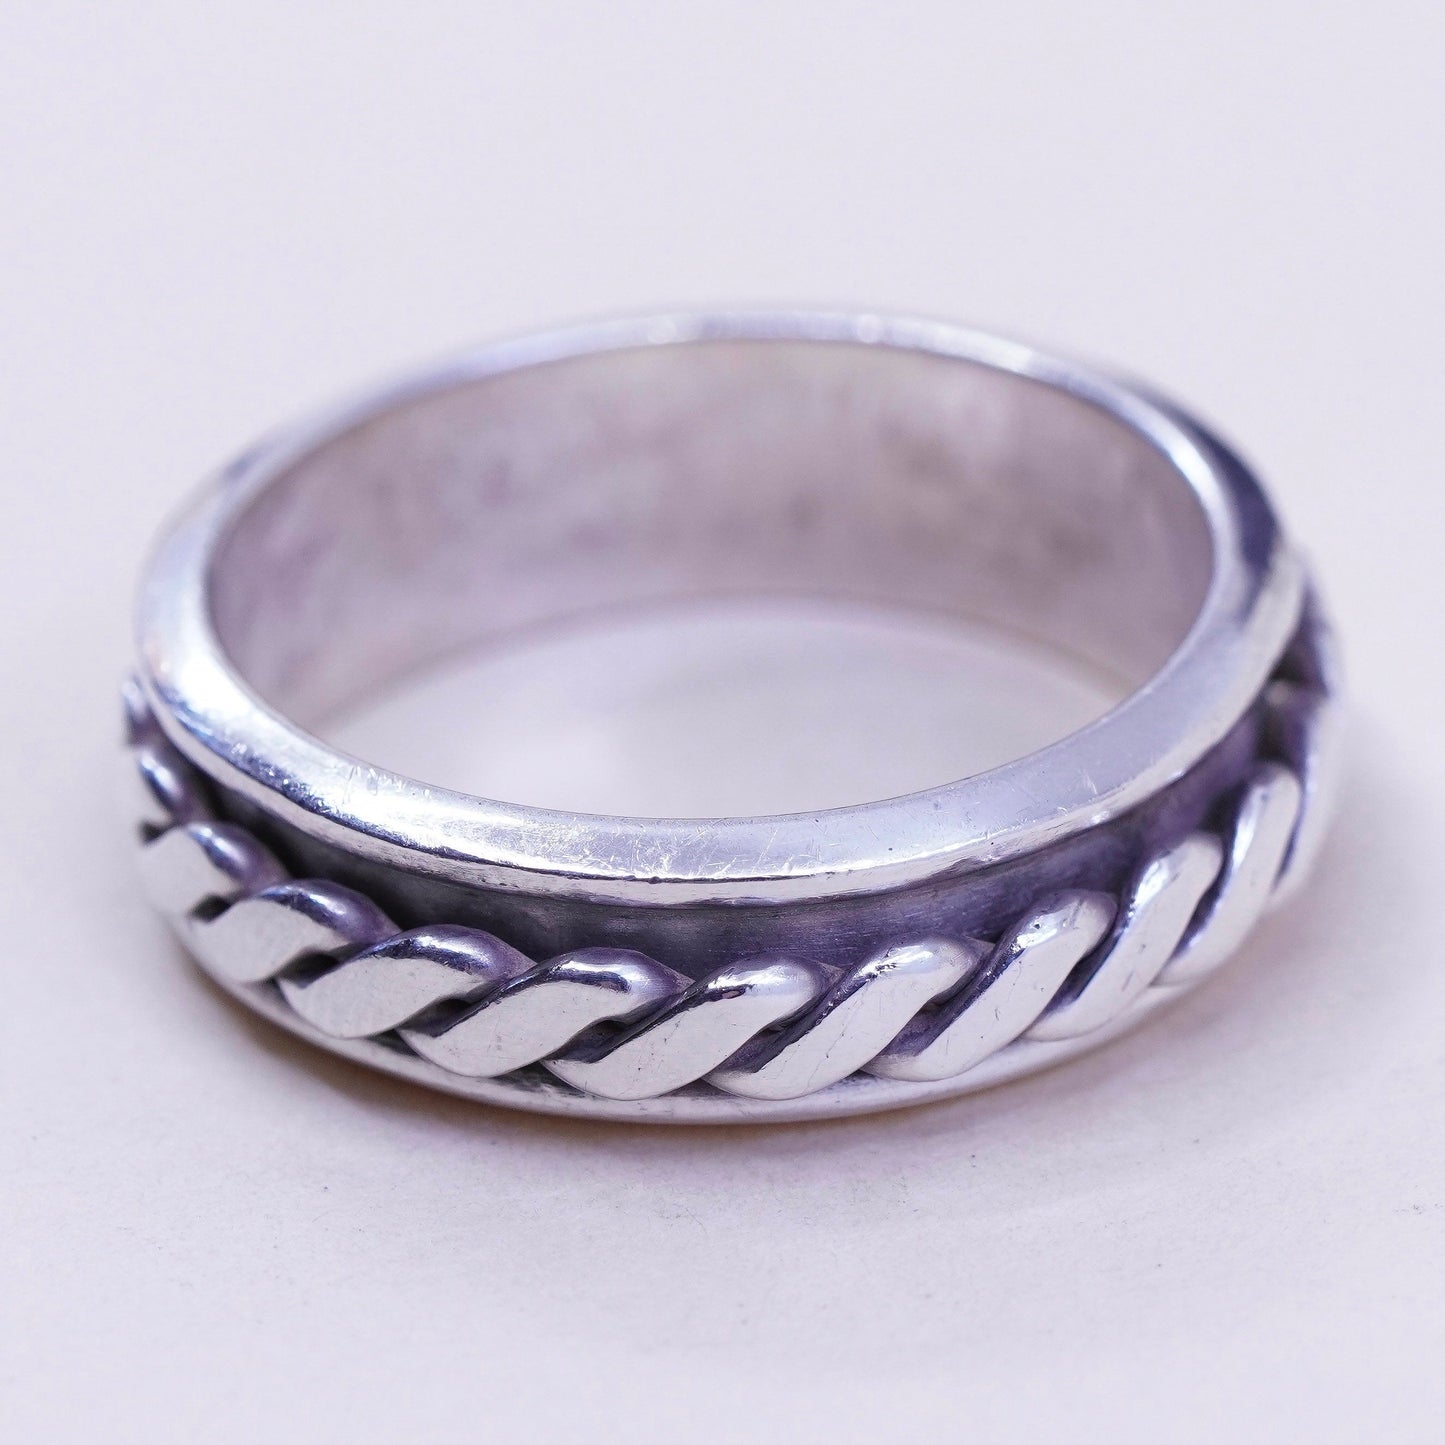 Size 14, vintage sterling silver handmade ring, 925 spinner roller band cable